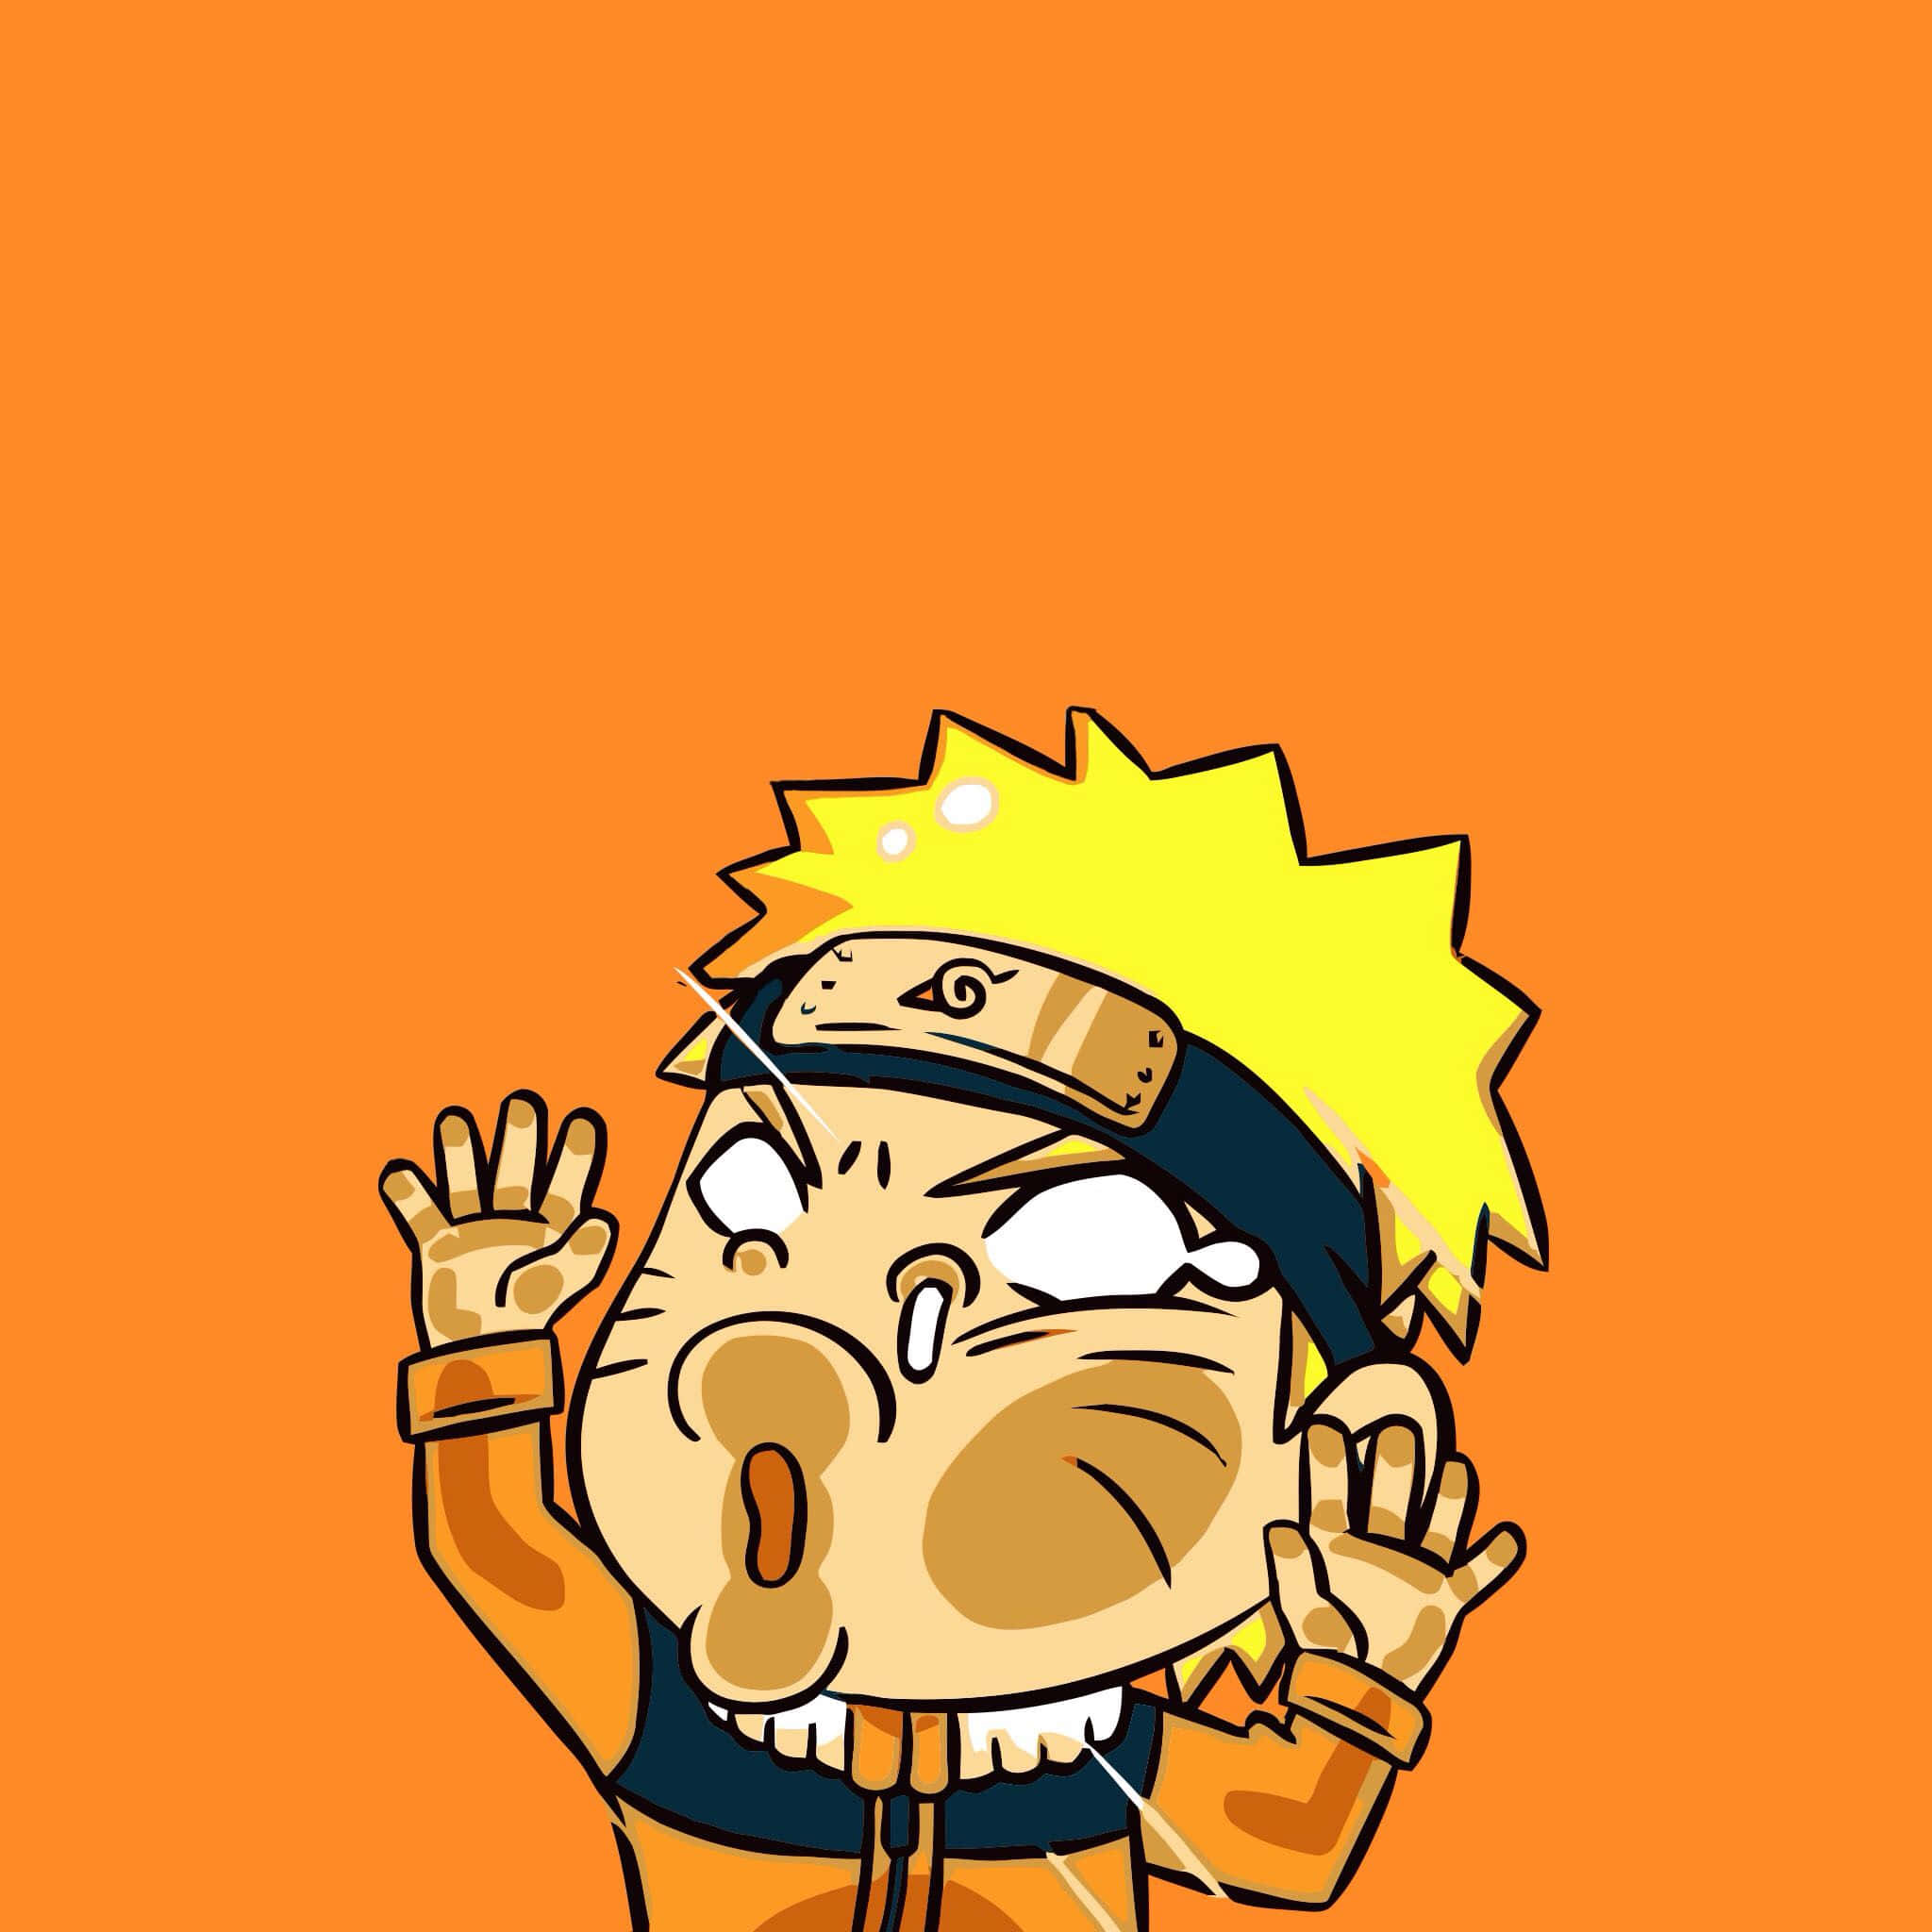 Hilarious Naruto moment of Team 7